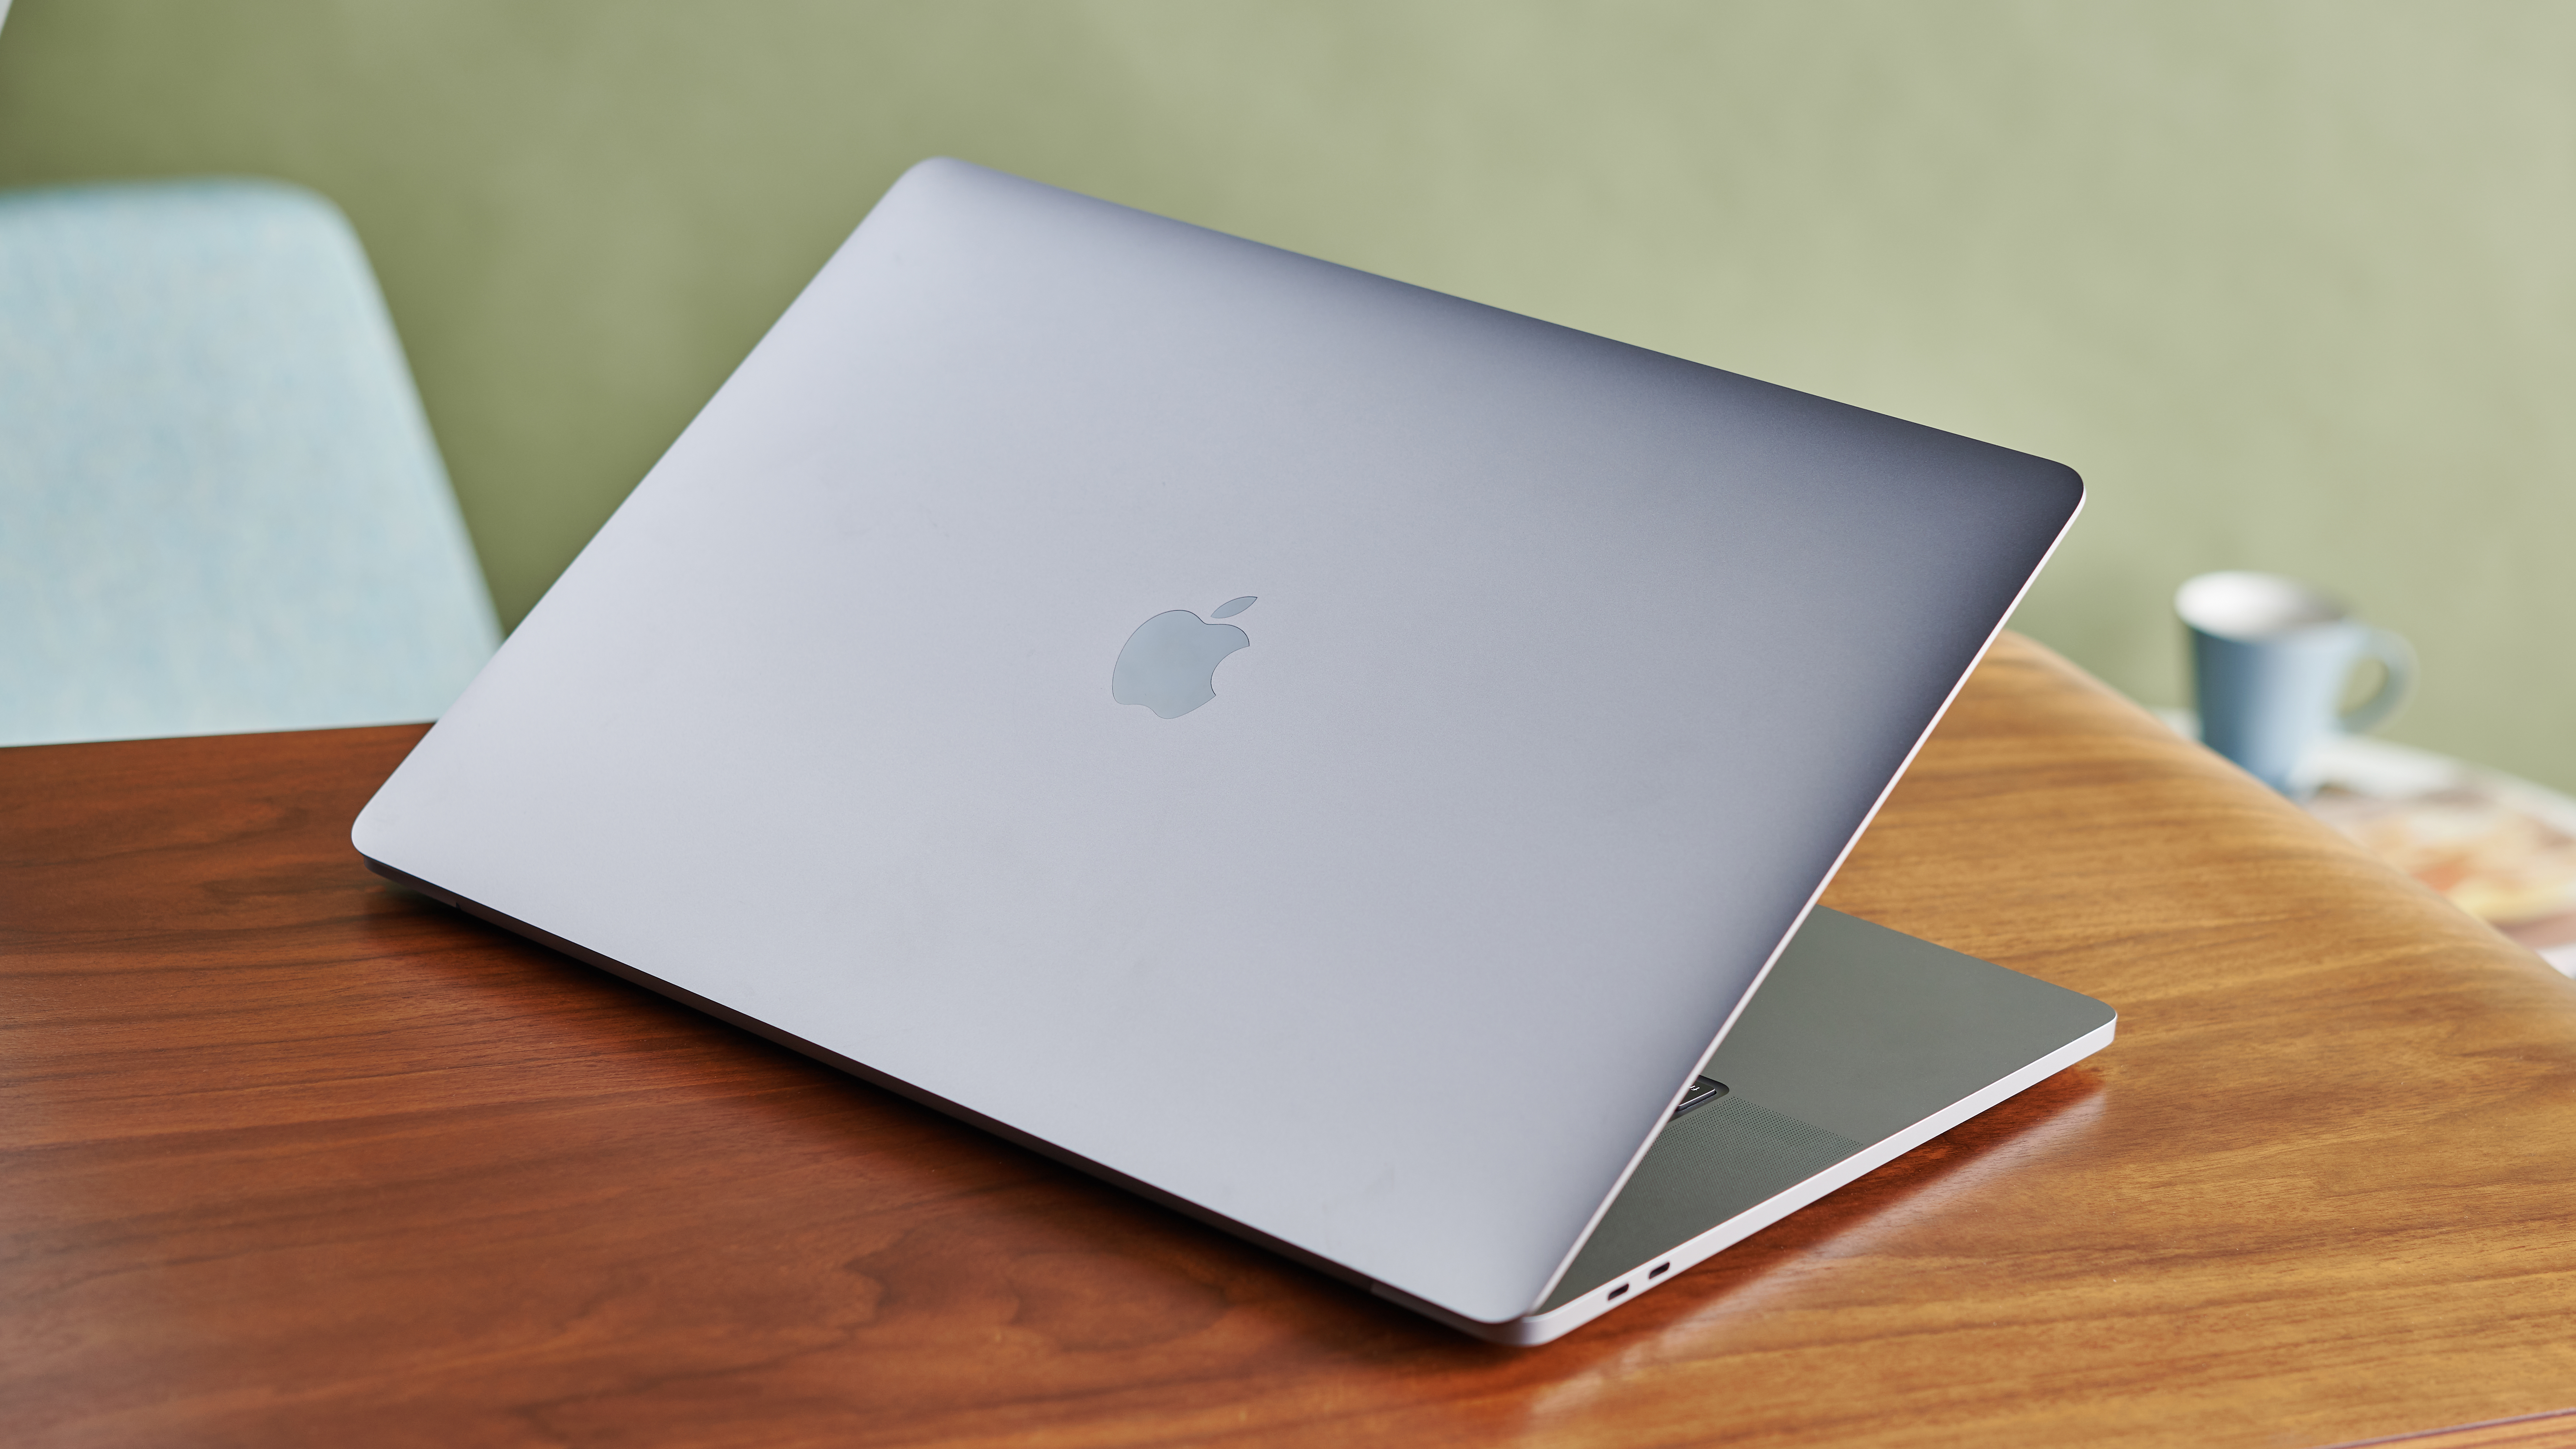 Apple macbook pro 15 price south africa bear with